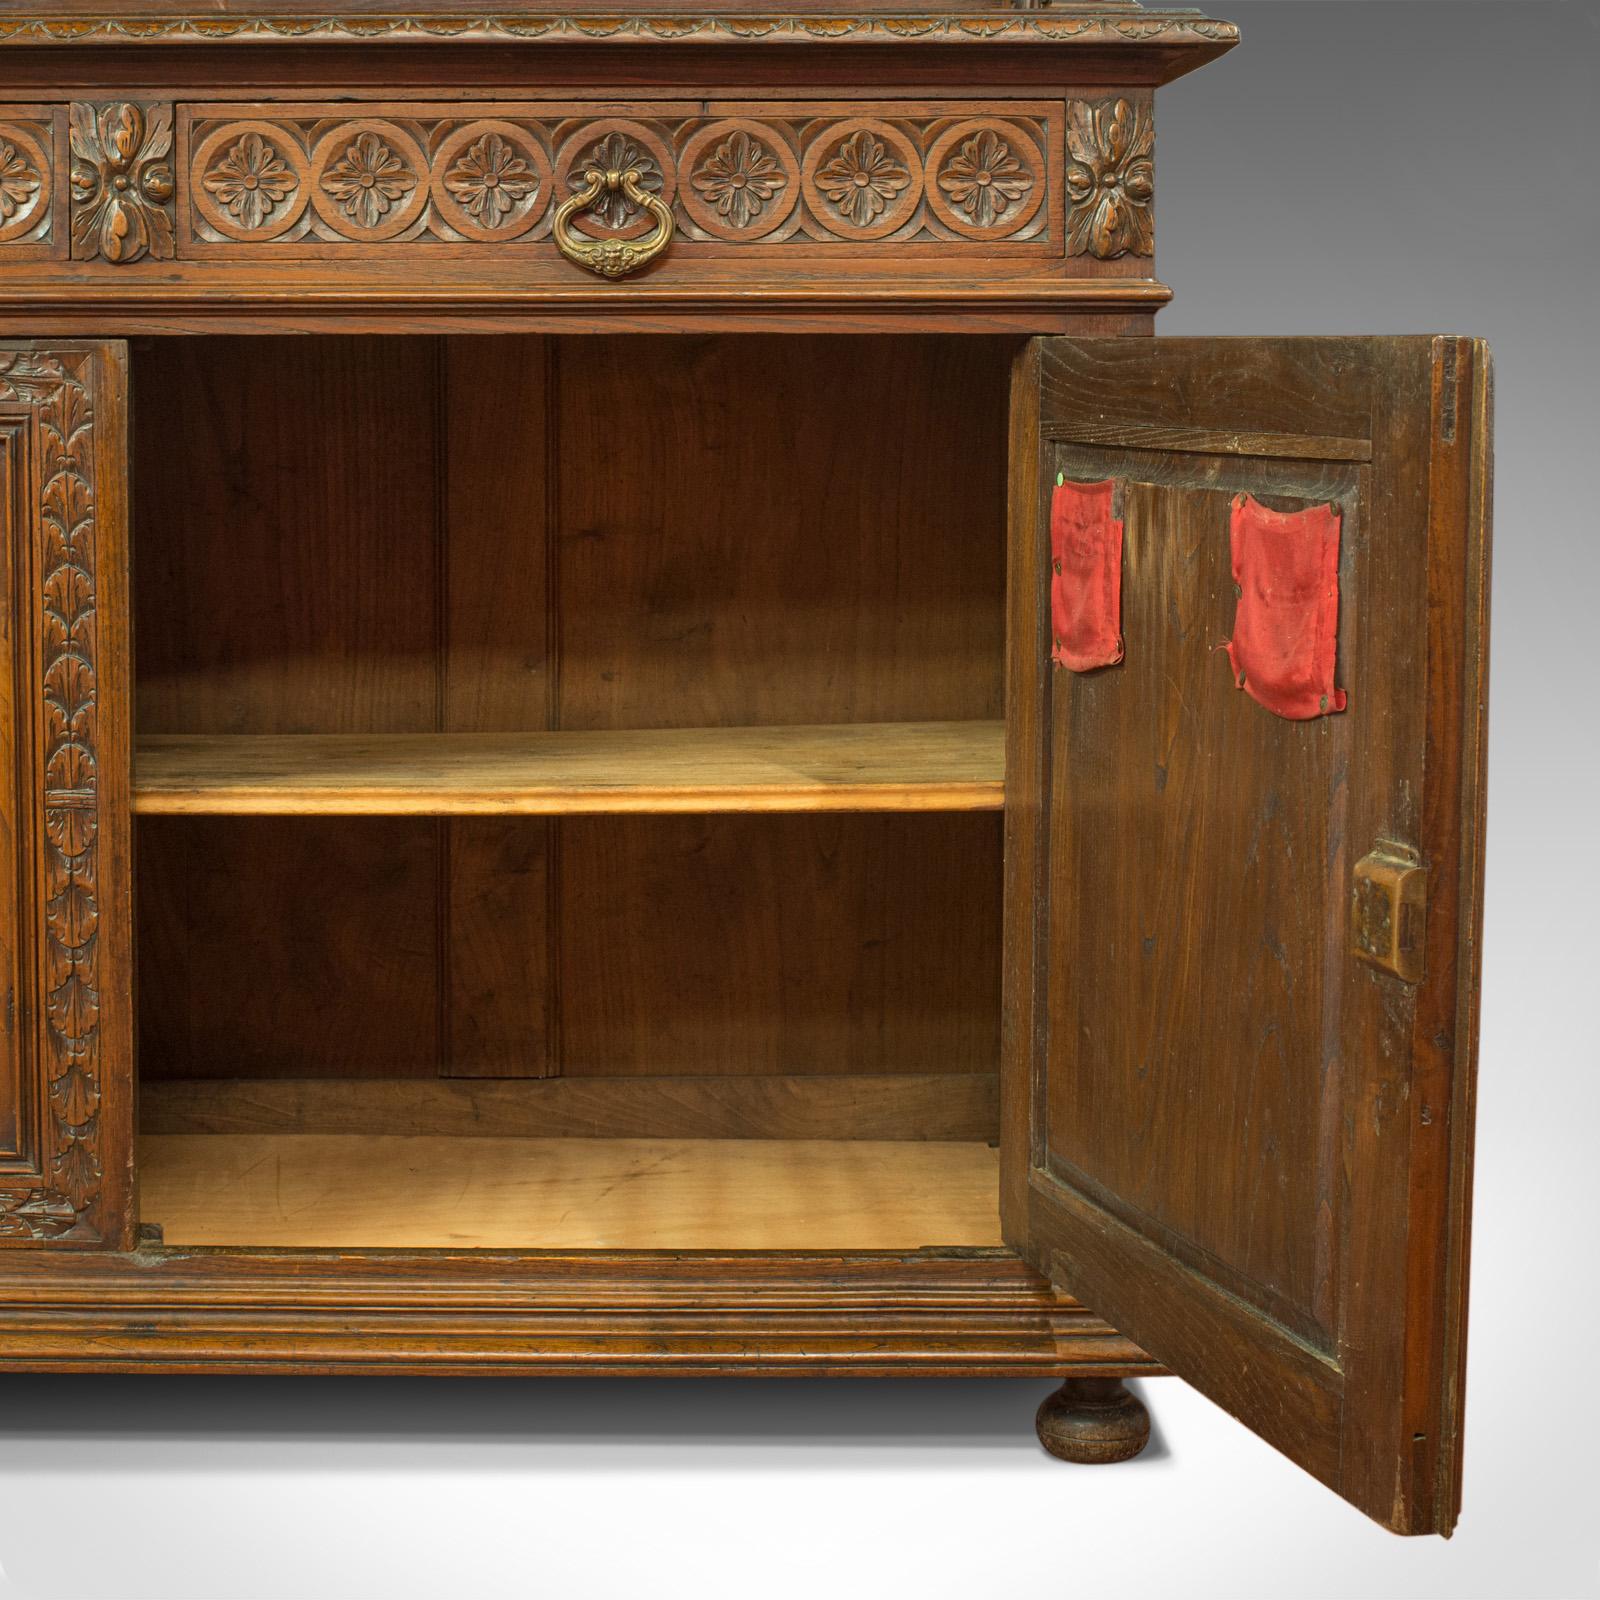 Antique Carved Breton Buffet Cabinet, French, Sideboard, Oak, circa 1880 For Sale 3